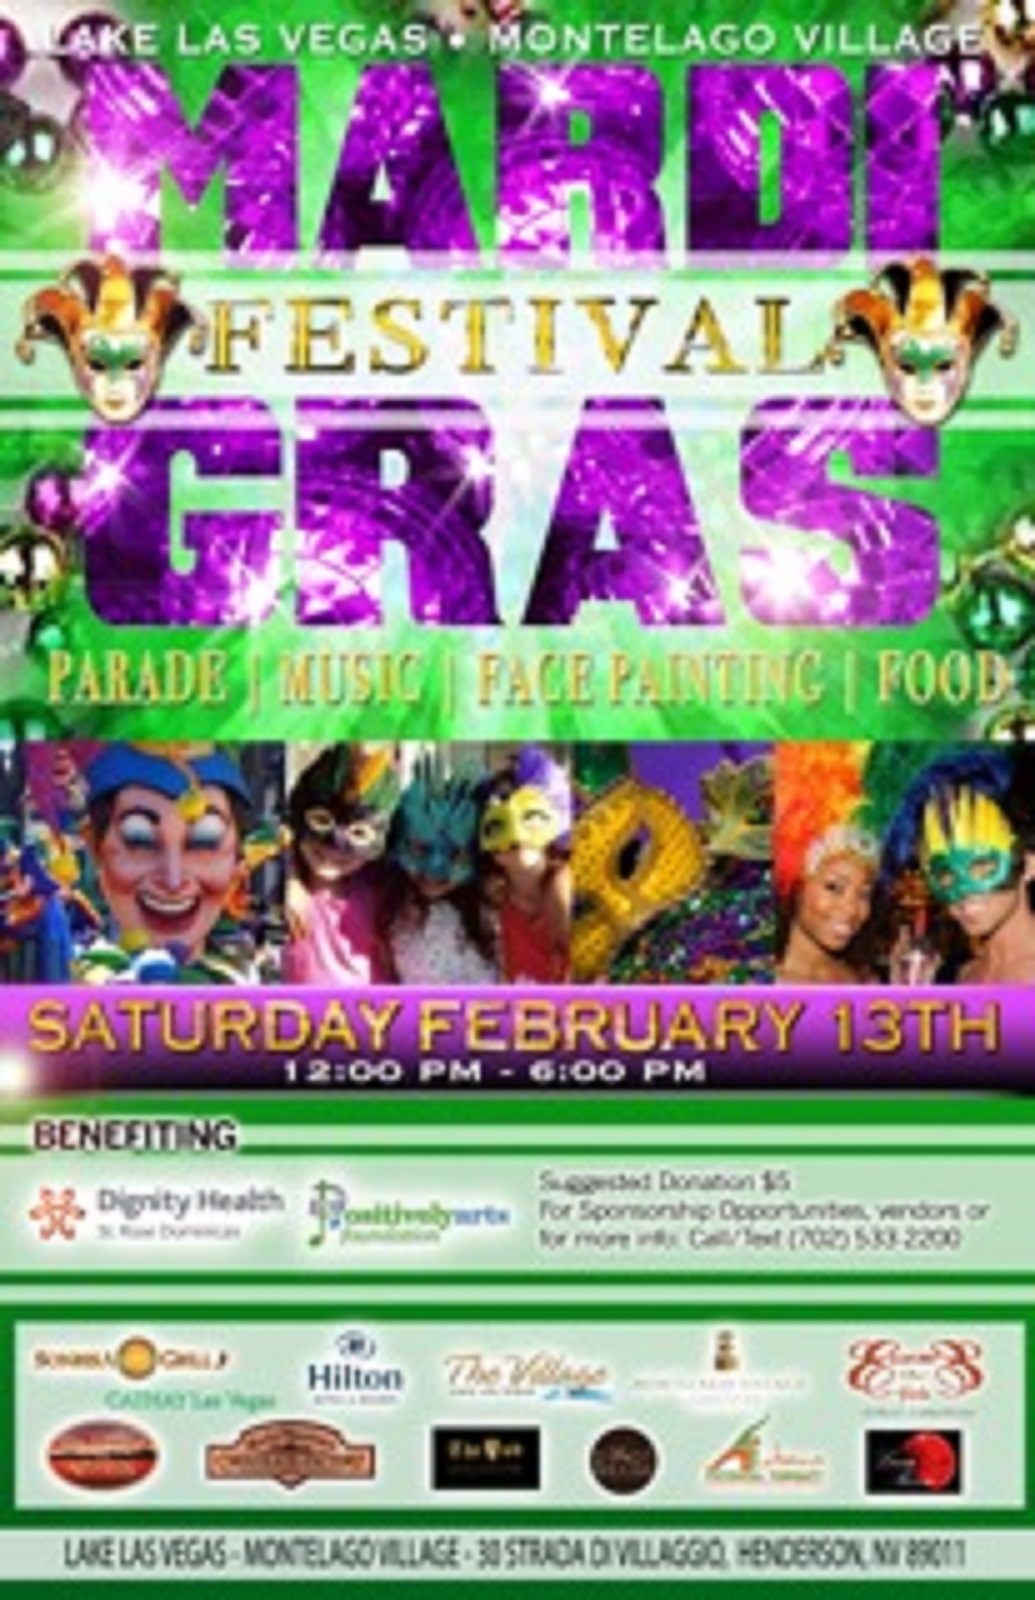 The Lake Las Vegas Master Planned Community and MonteLago Village Association are holding a Mardi Gras Festival and invite the public to enjoy the party on Saturday, Feb. 13 from noon to 6 p.m.